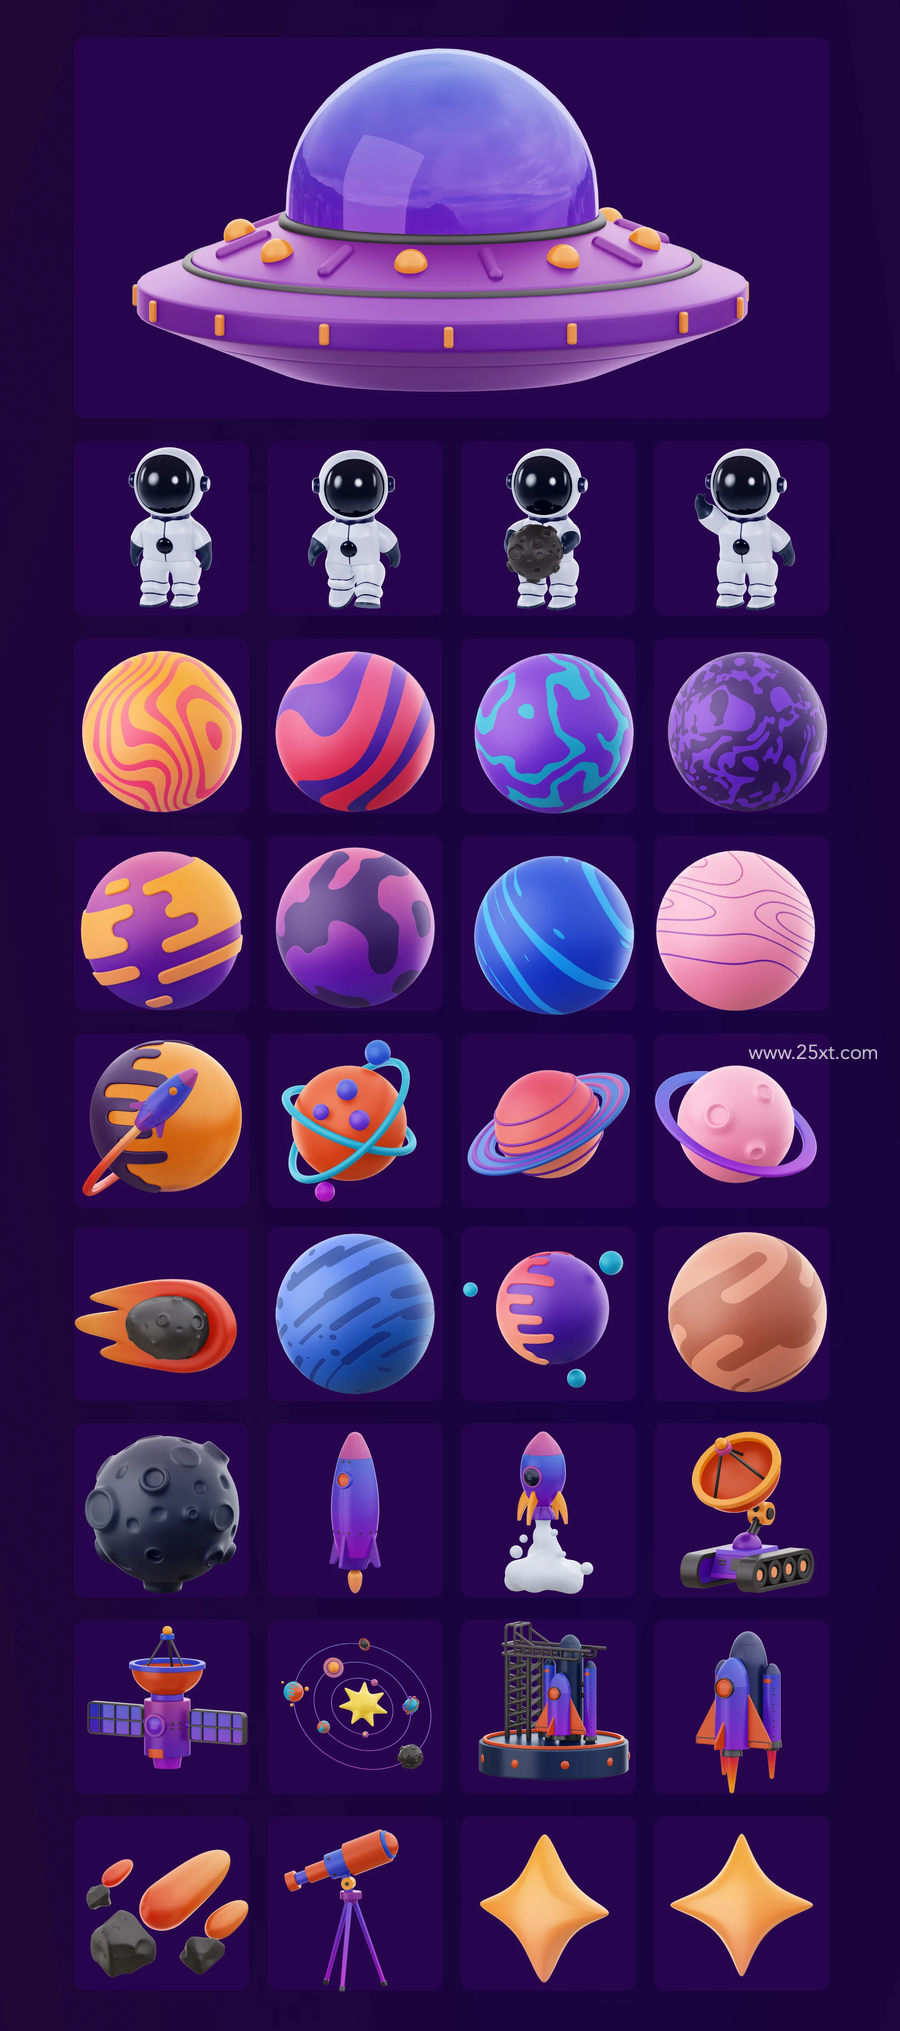 25xt-172698-Space! 3D Icon Pack8.jpg